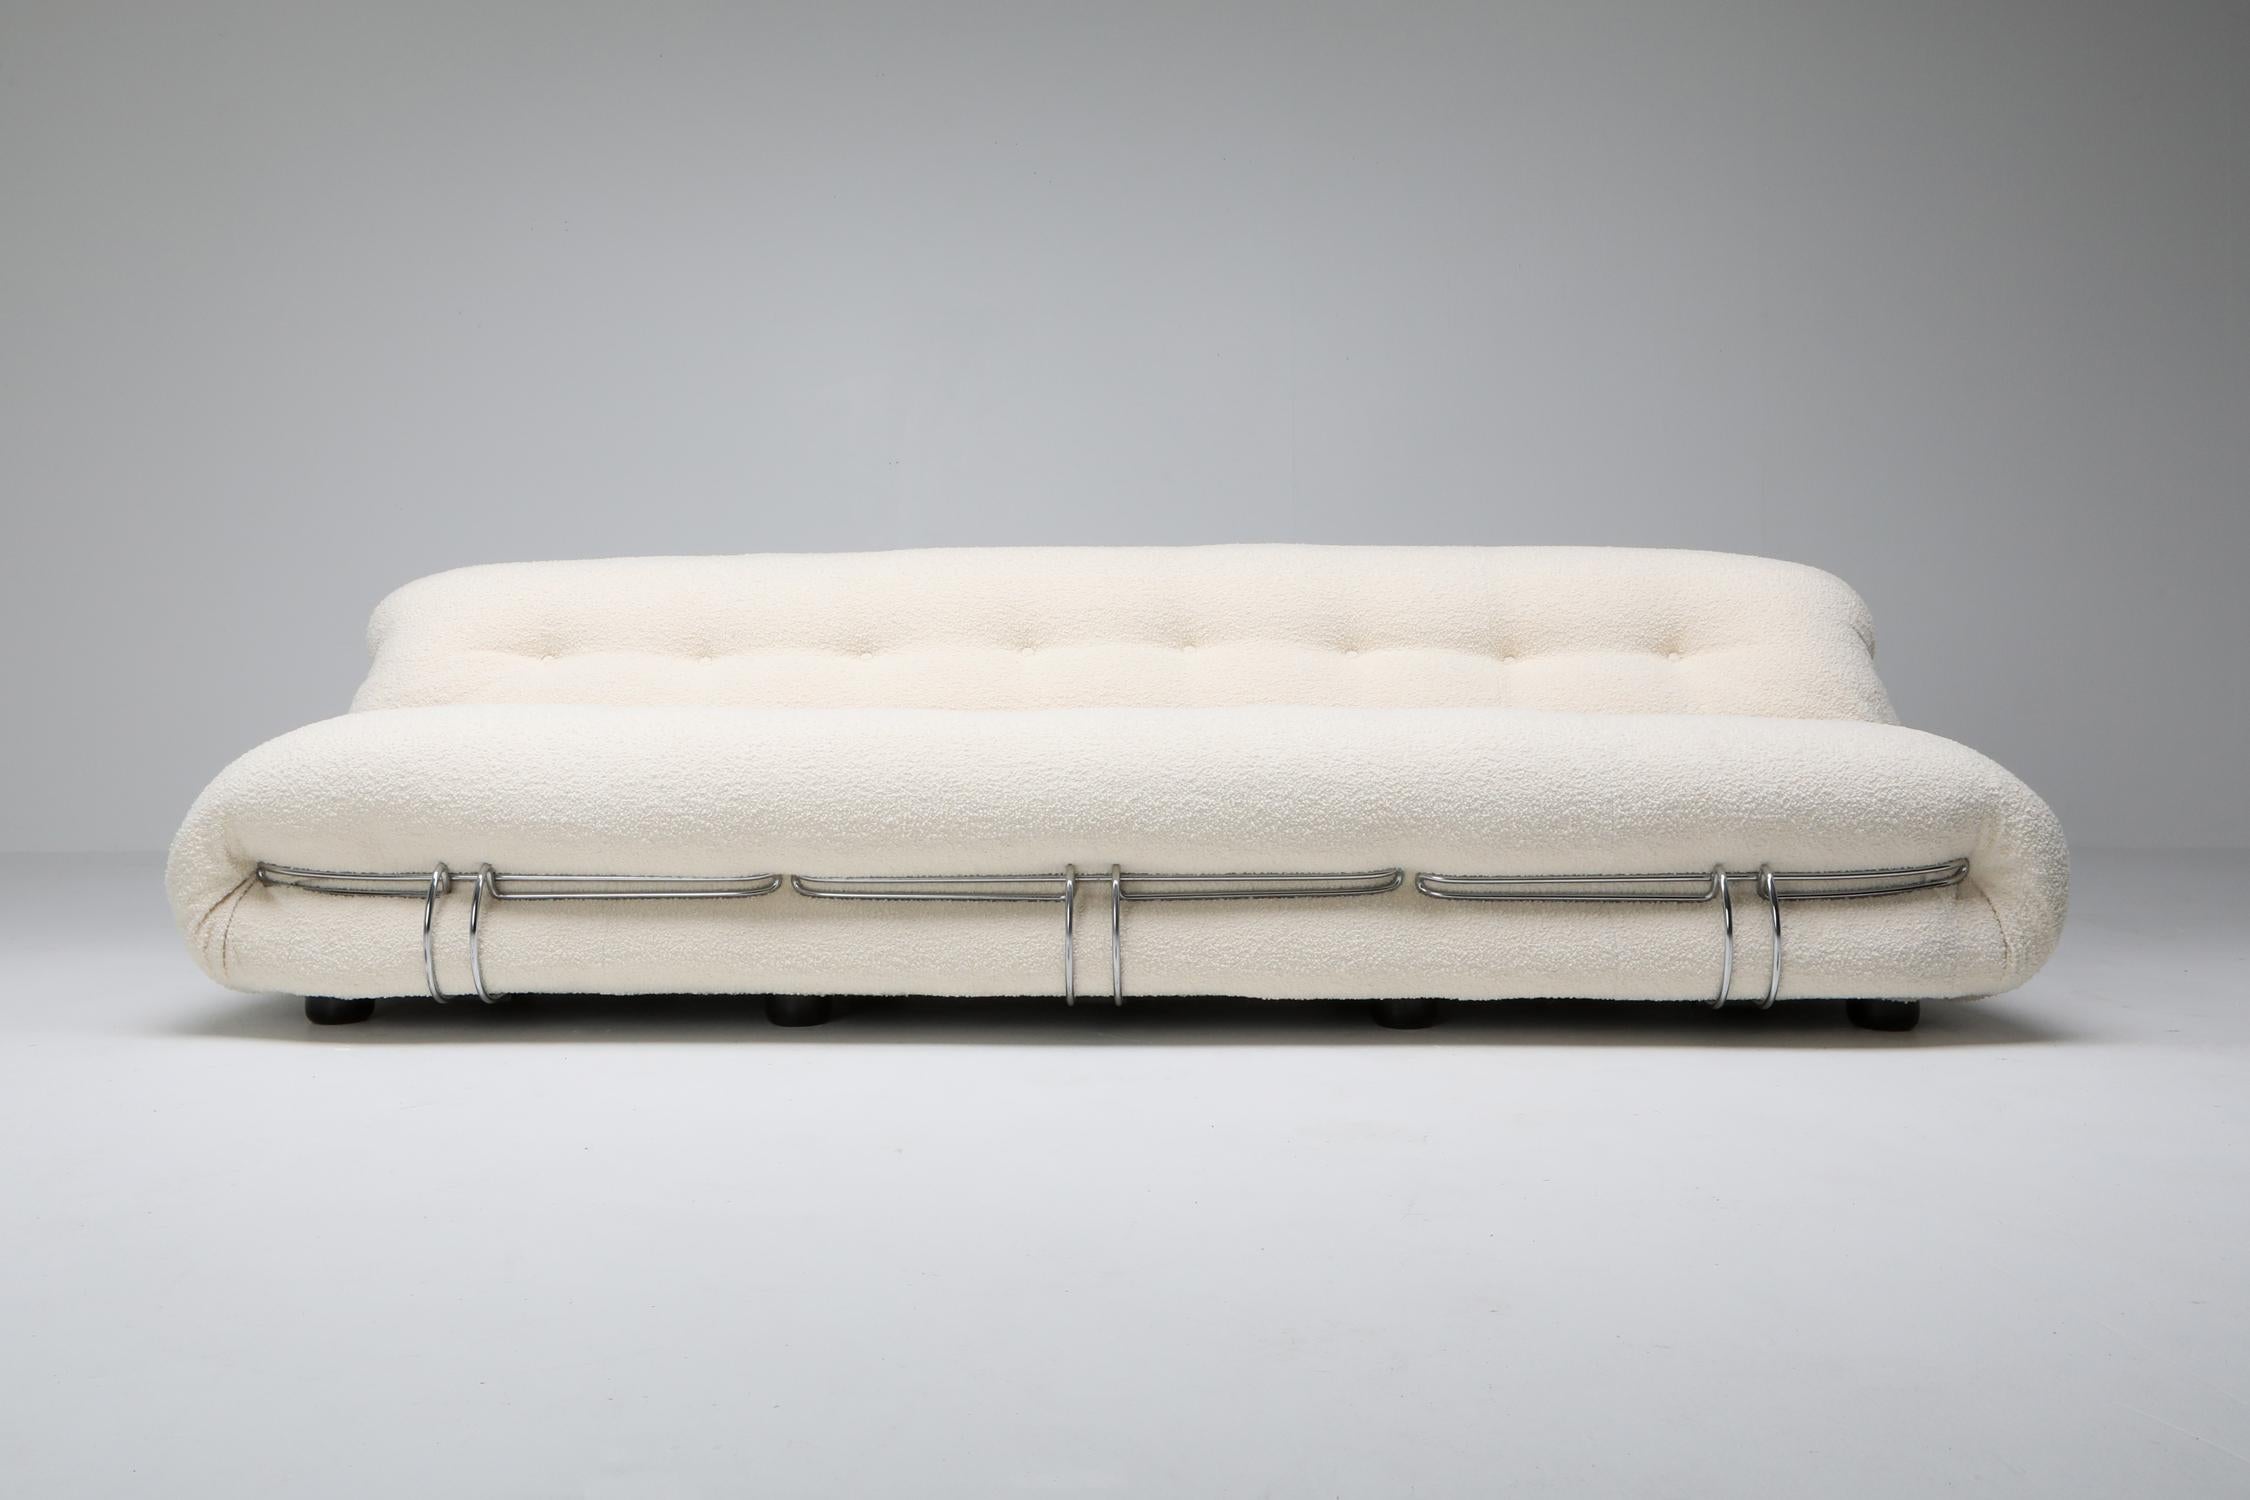 Postmodern couch by Afra and Tobia Scarpa for Cassina
reupholstered in ivory bouclé wool

Manufactured by Cassina in the 1970s, the Soriana collection was meant to express beauty and comfort by using a whole bundle of fabric held by a